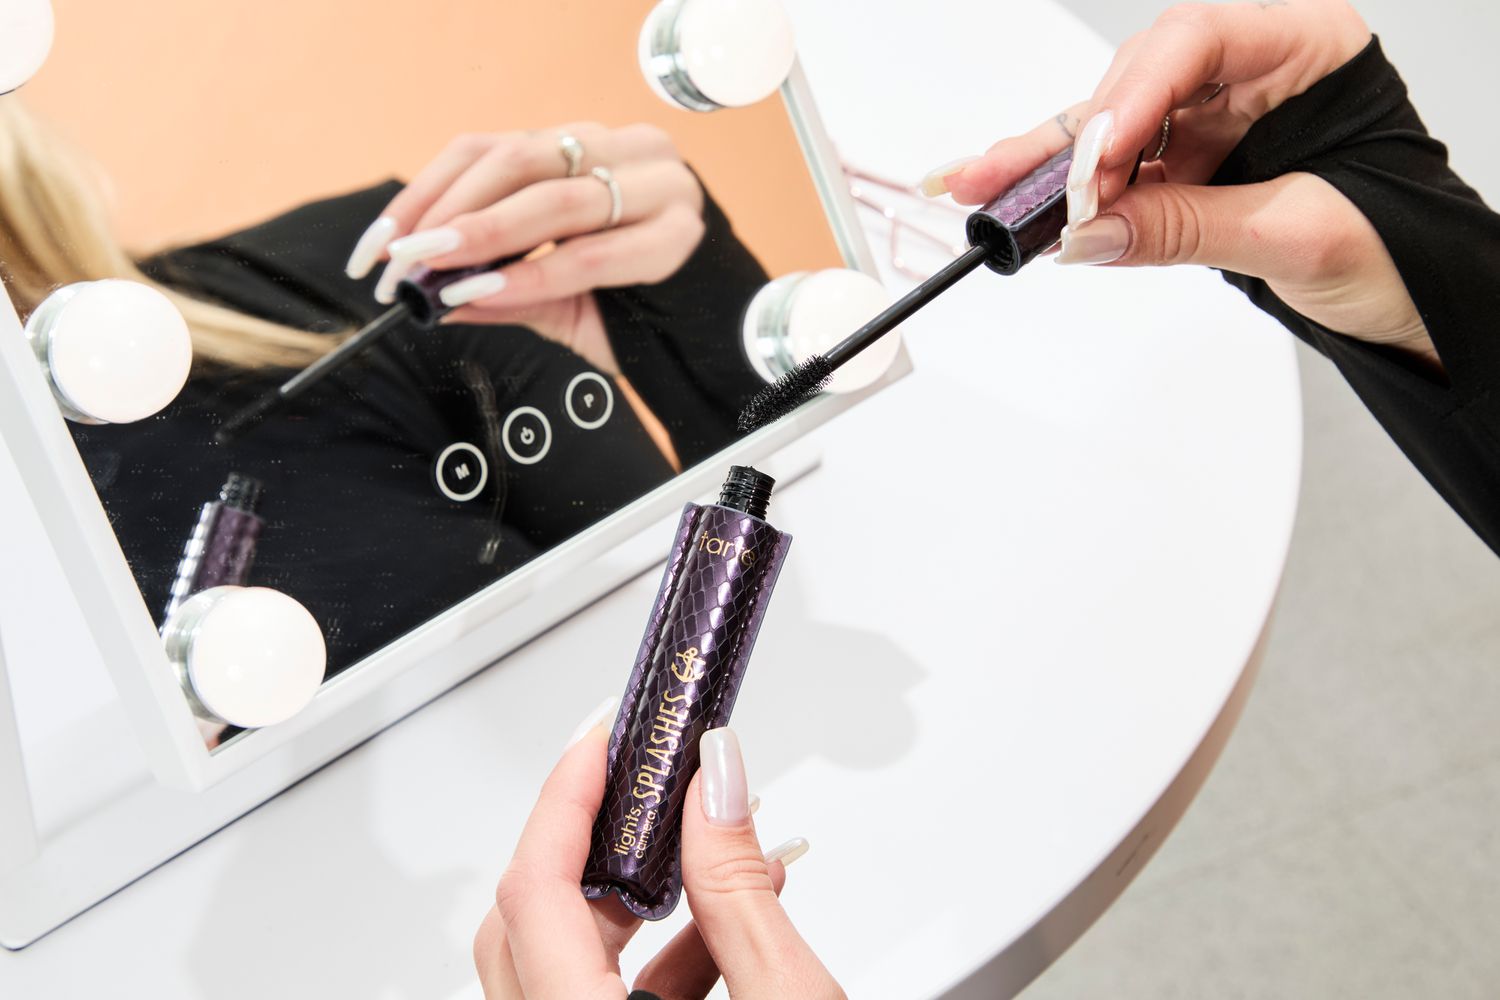 A person removes the cap on the Tarte Lights, Camera Splashes Waterproof Mascara